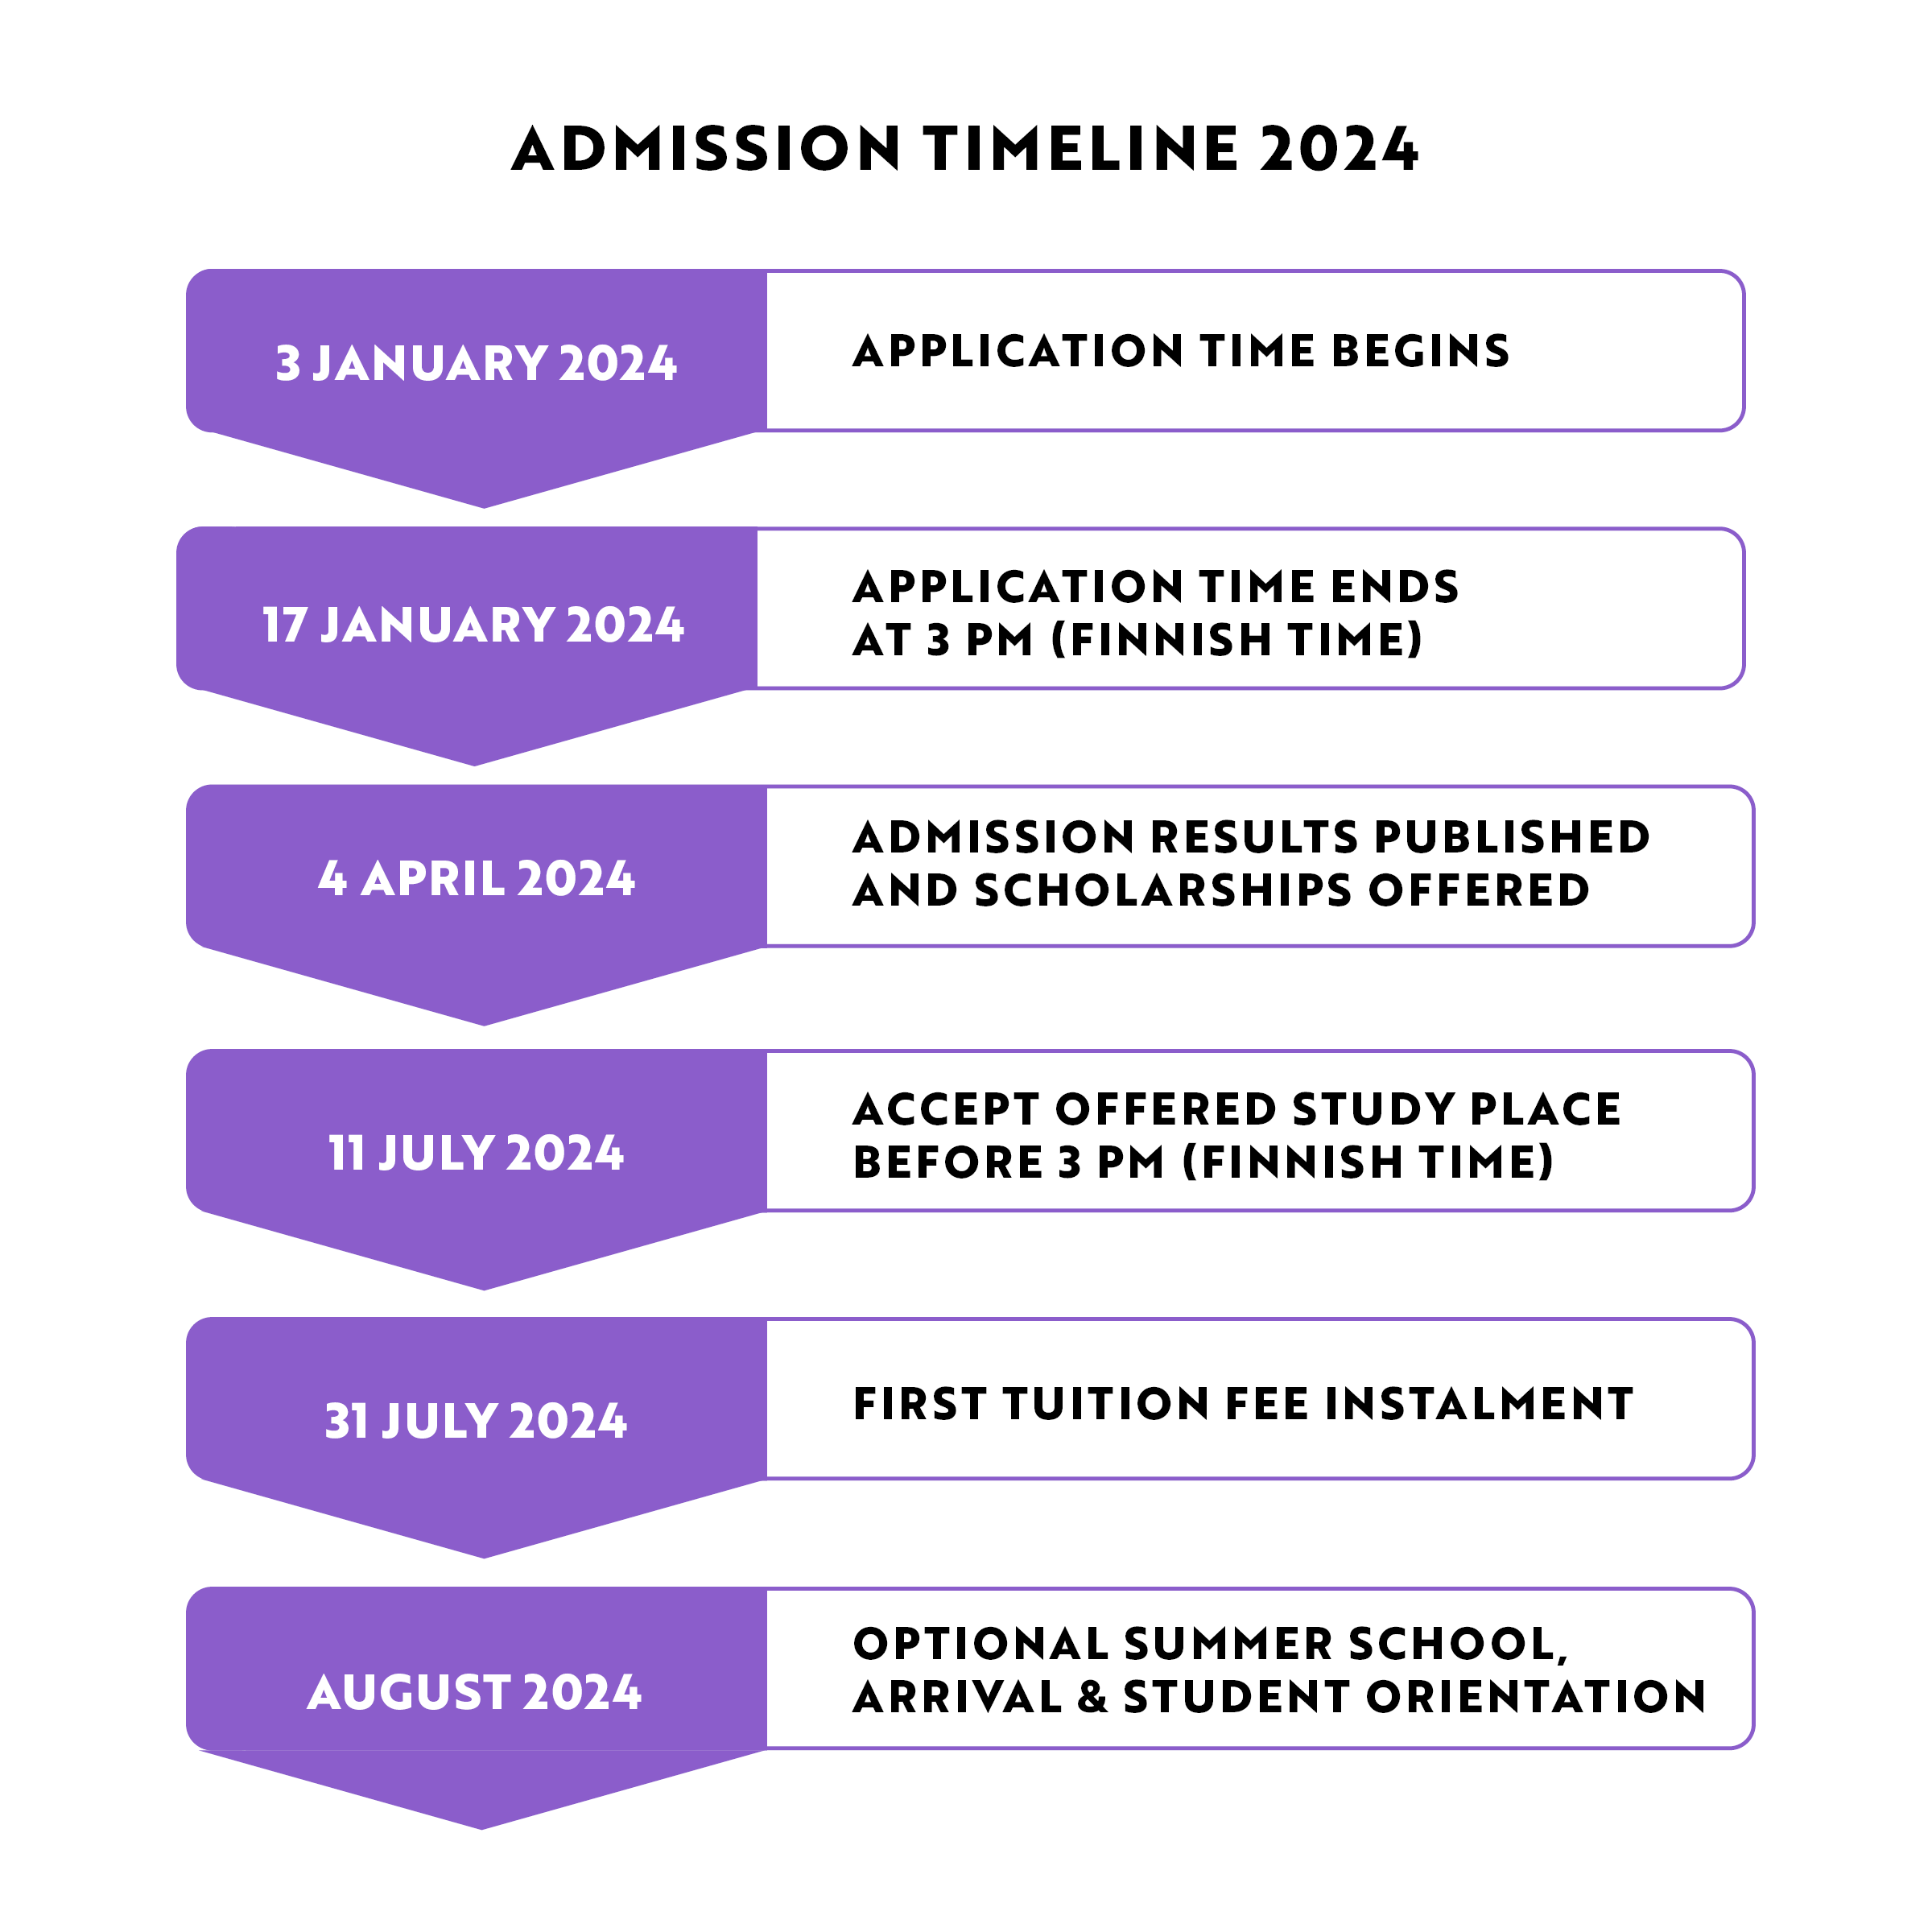 Admission timeline for studies starting in August 2024.